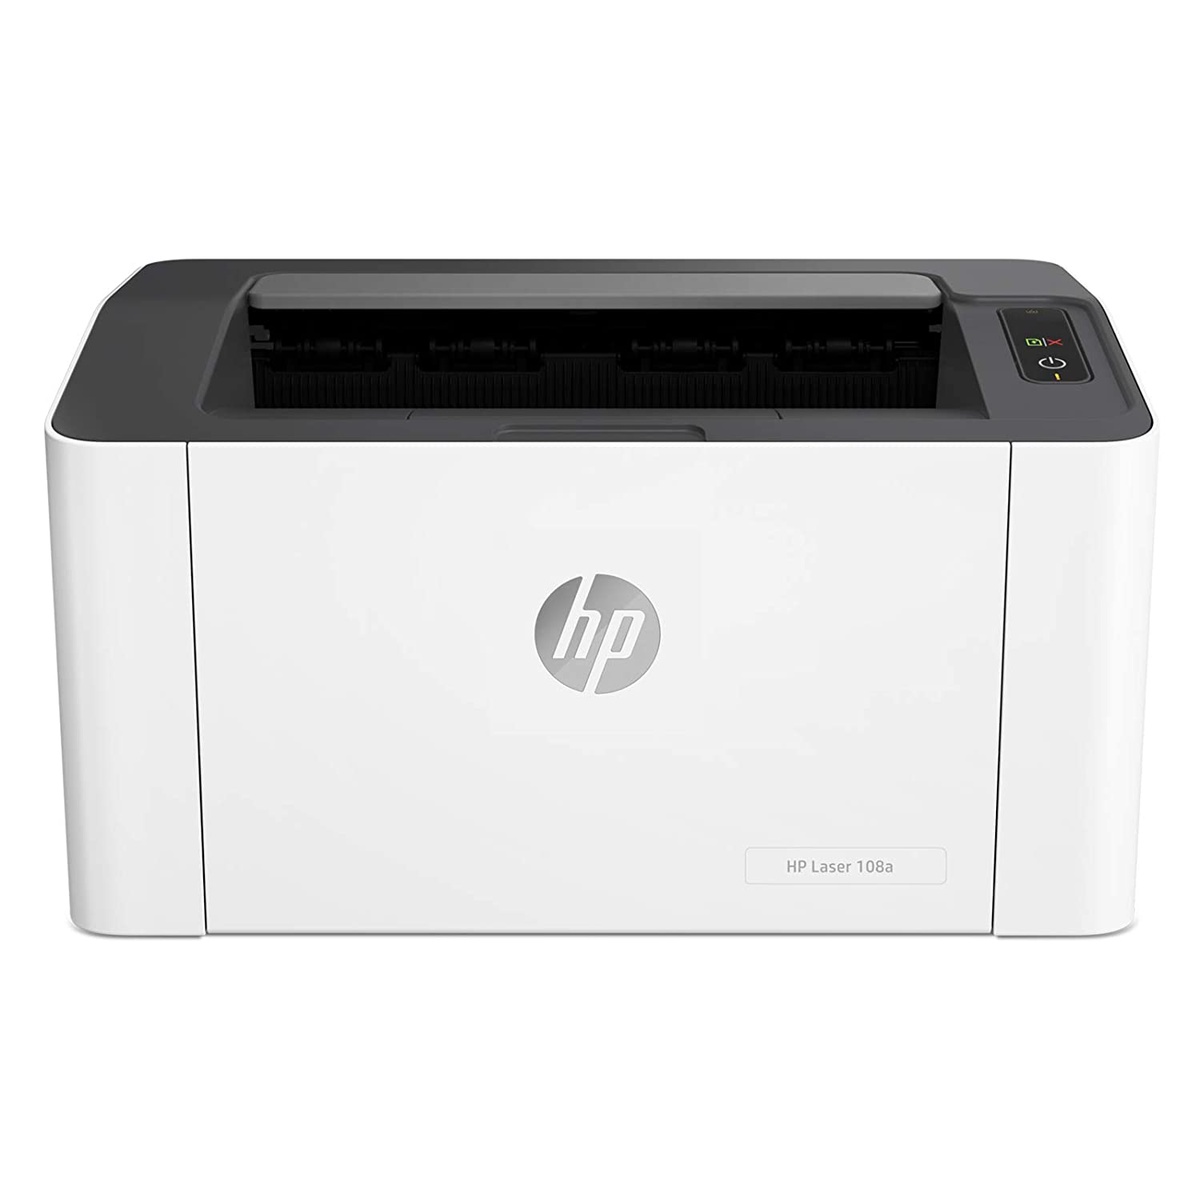 WHAT ARE THE MAIN FUNCTIONS AND SPECS OF HP OFFICEJET 4650?